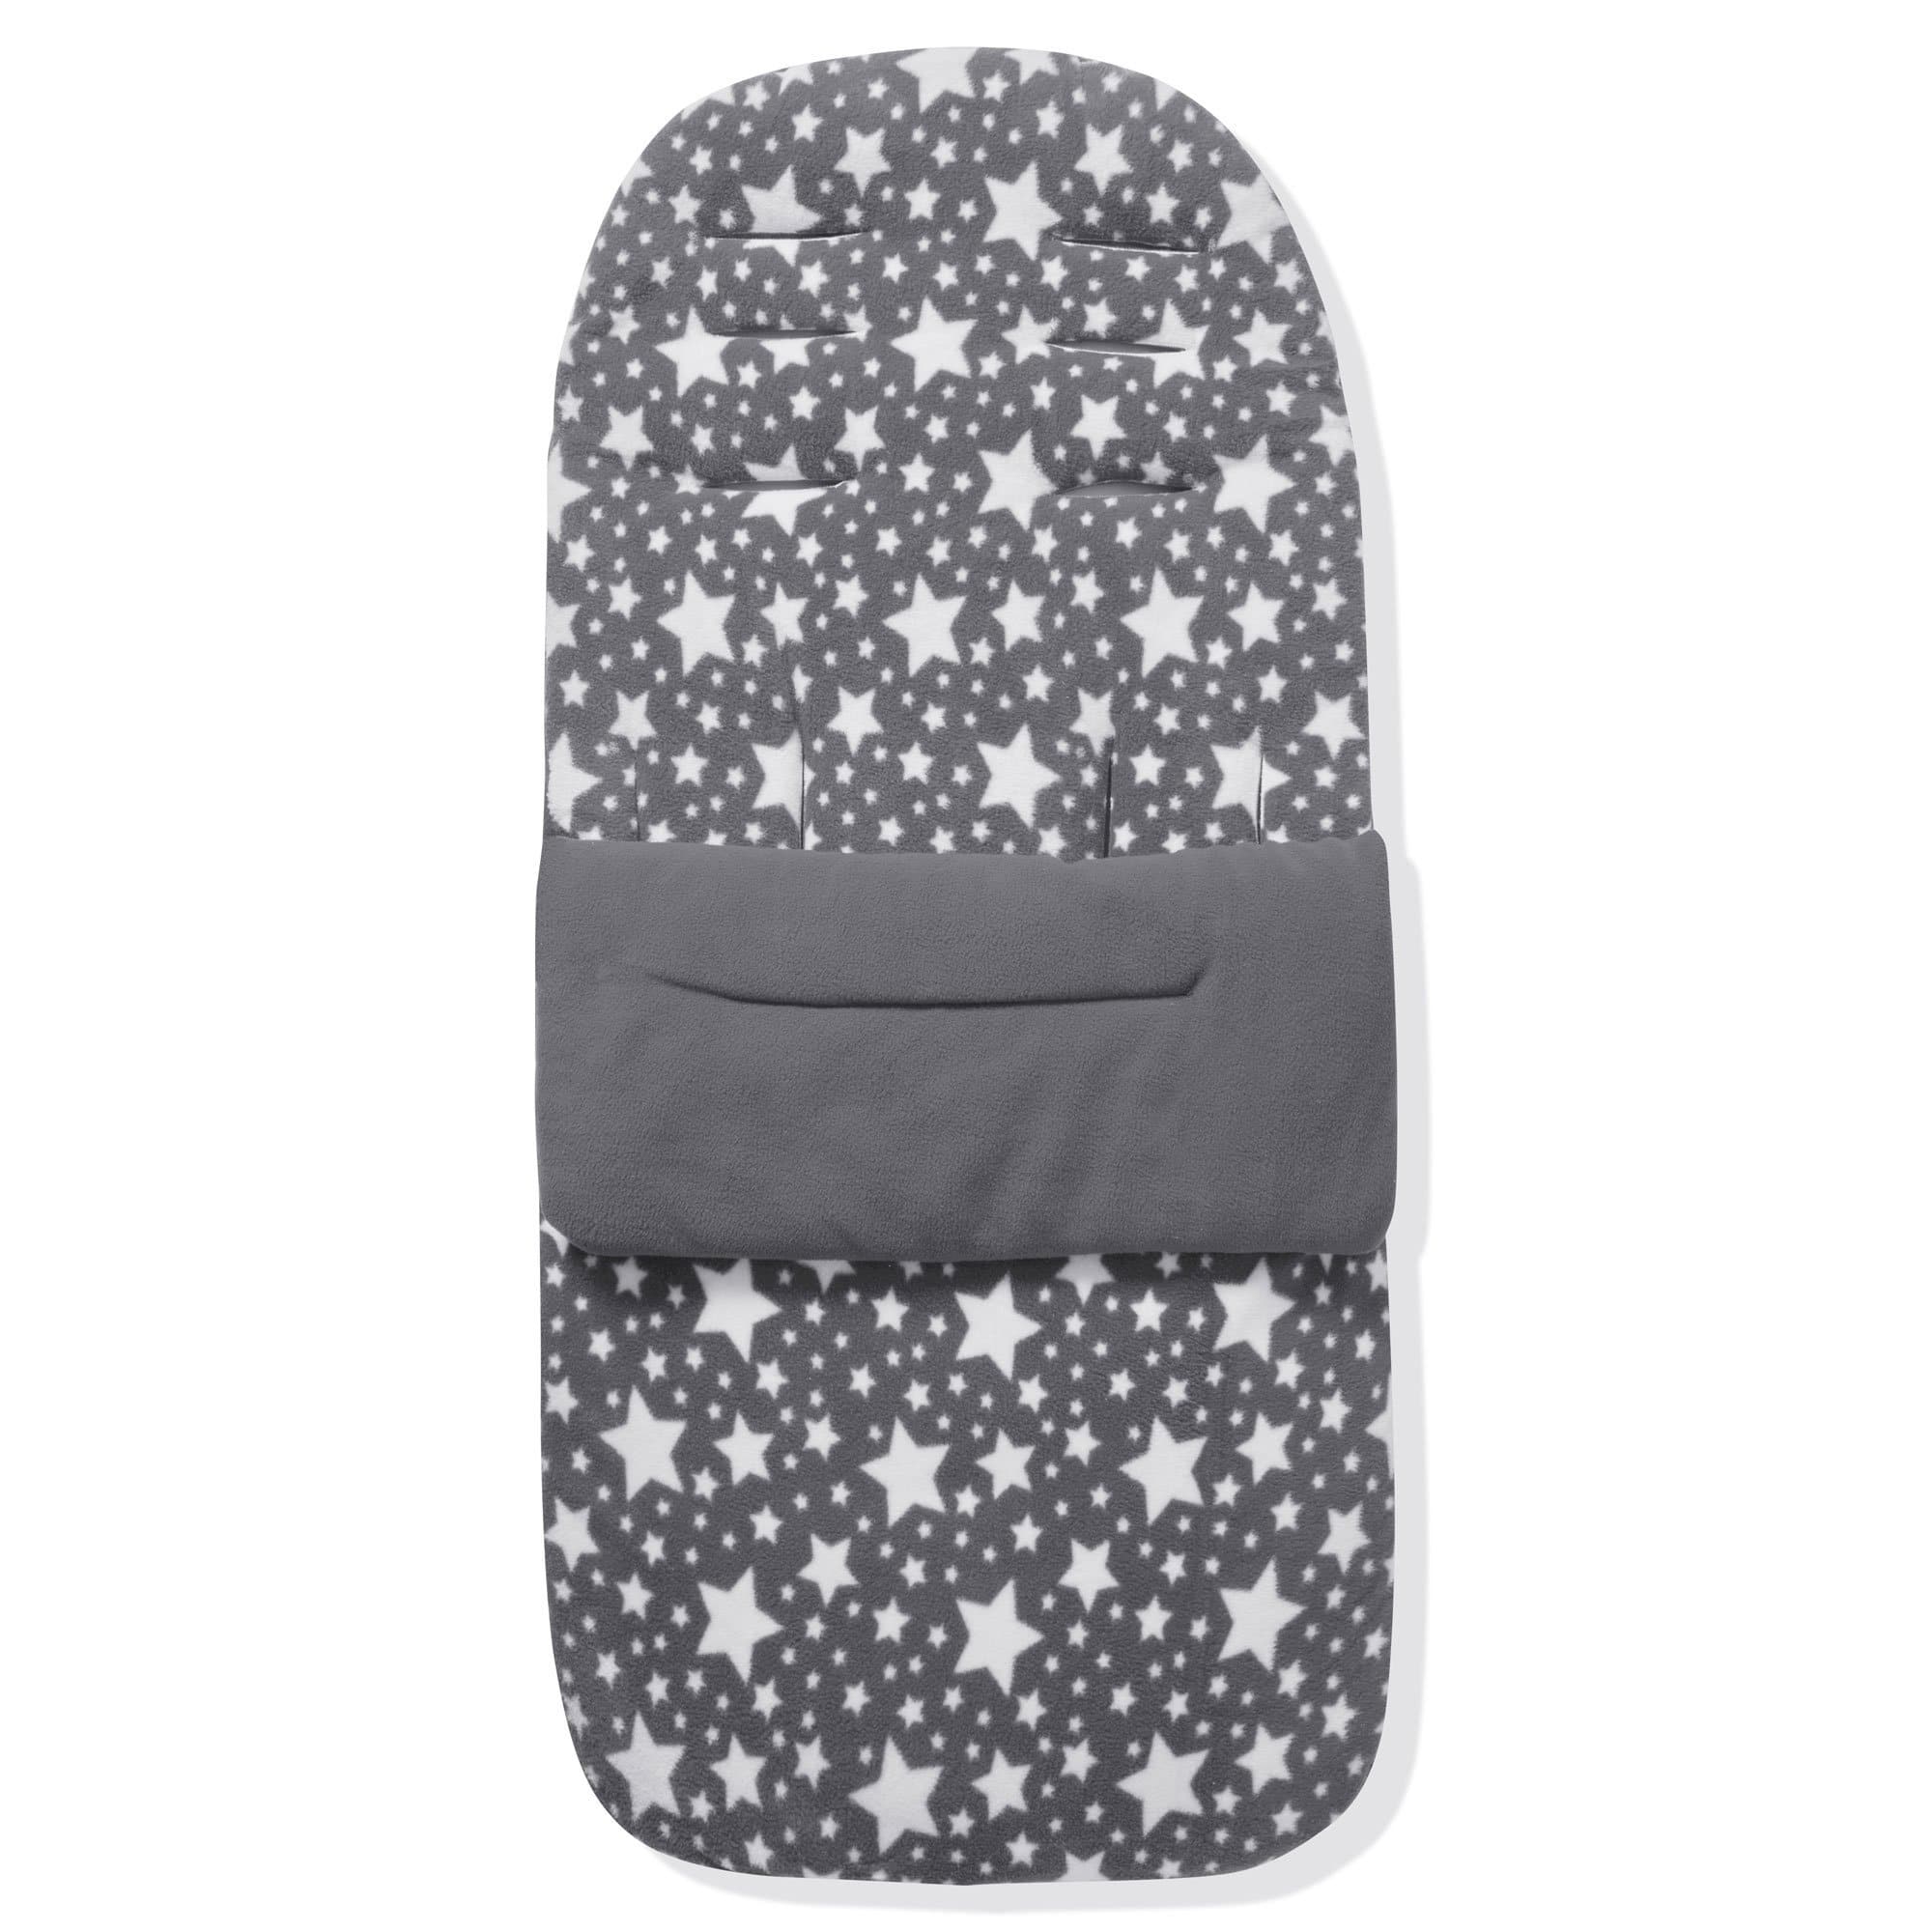 Fleece Footmuff / Cosy Toes Compatible with Kiddy - Grey Star / Fits All Models | For Your Little One